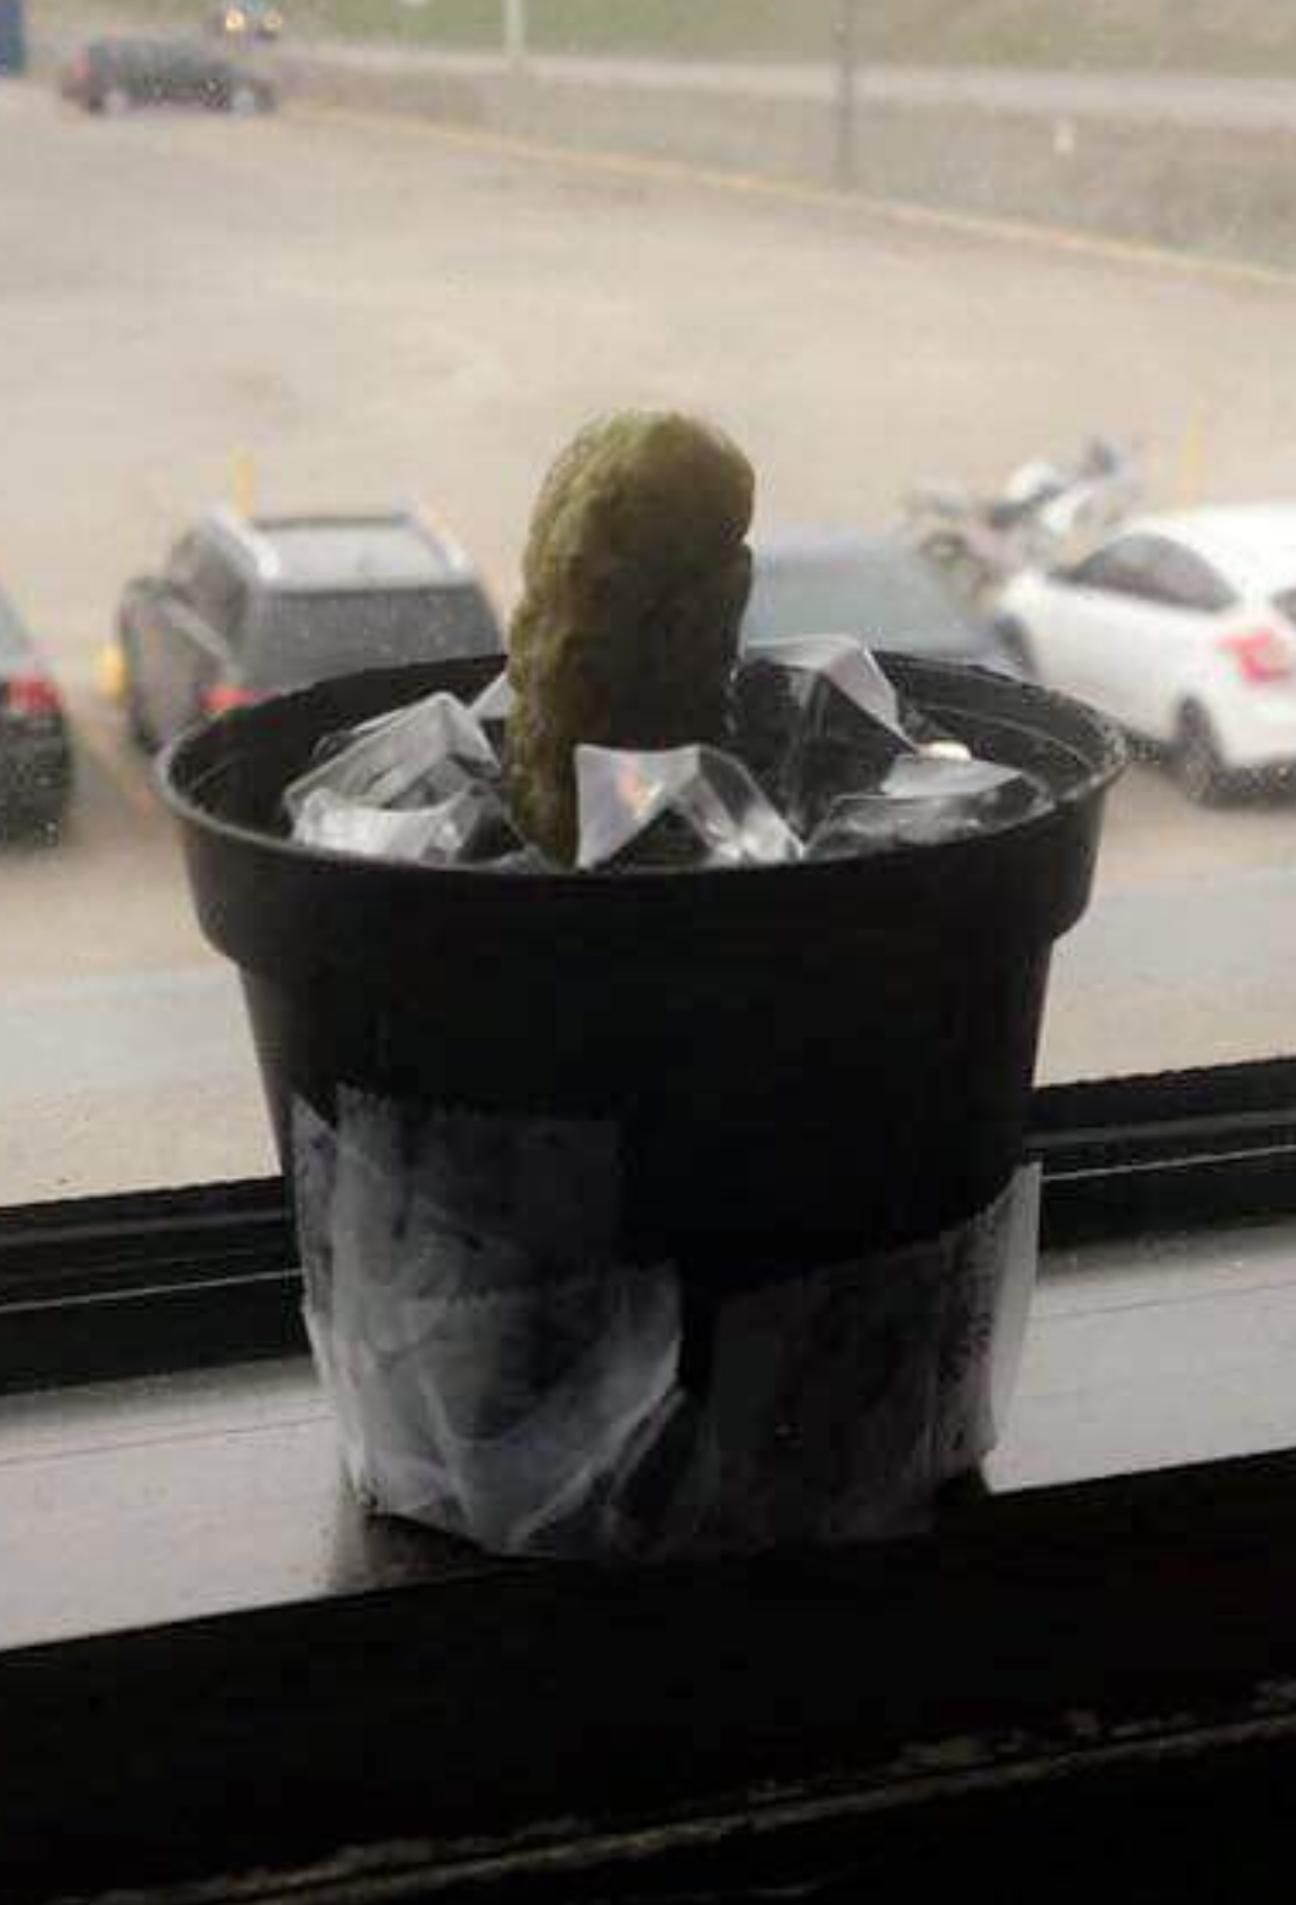 A guy at my wife's job still think that his new plant is a cactus. It's actually a pickle that is replaced by a new one each 2 days... It's been like that for 2 weeks now.